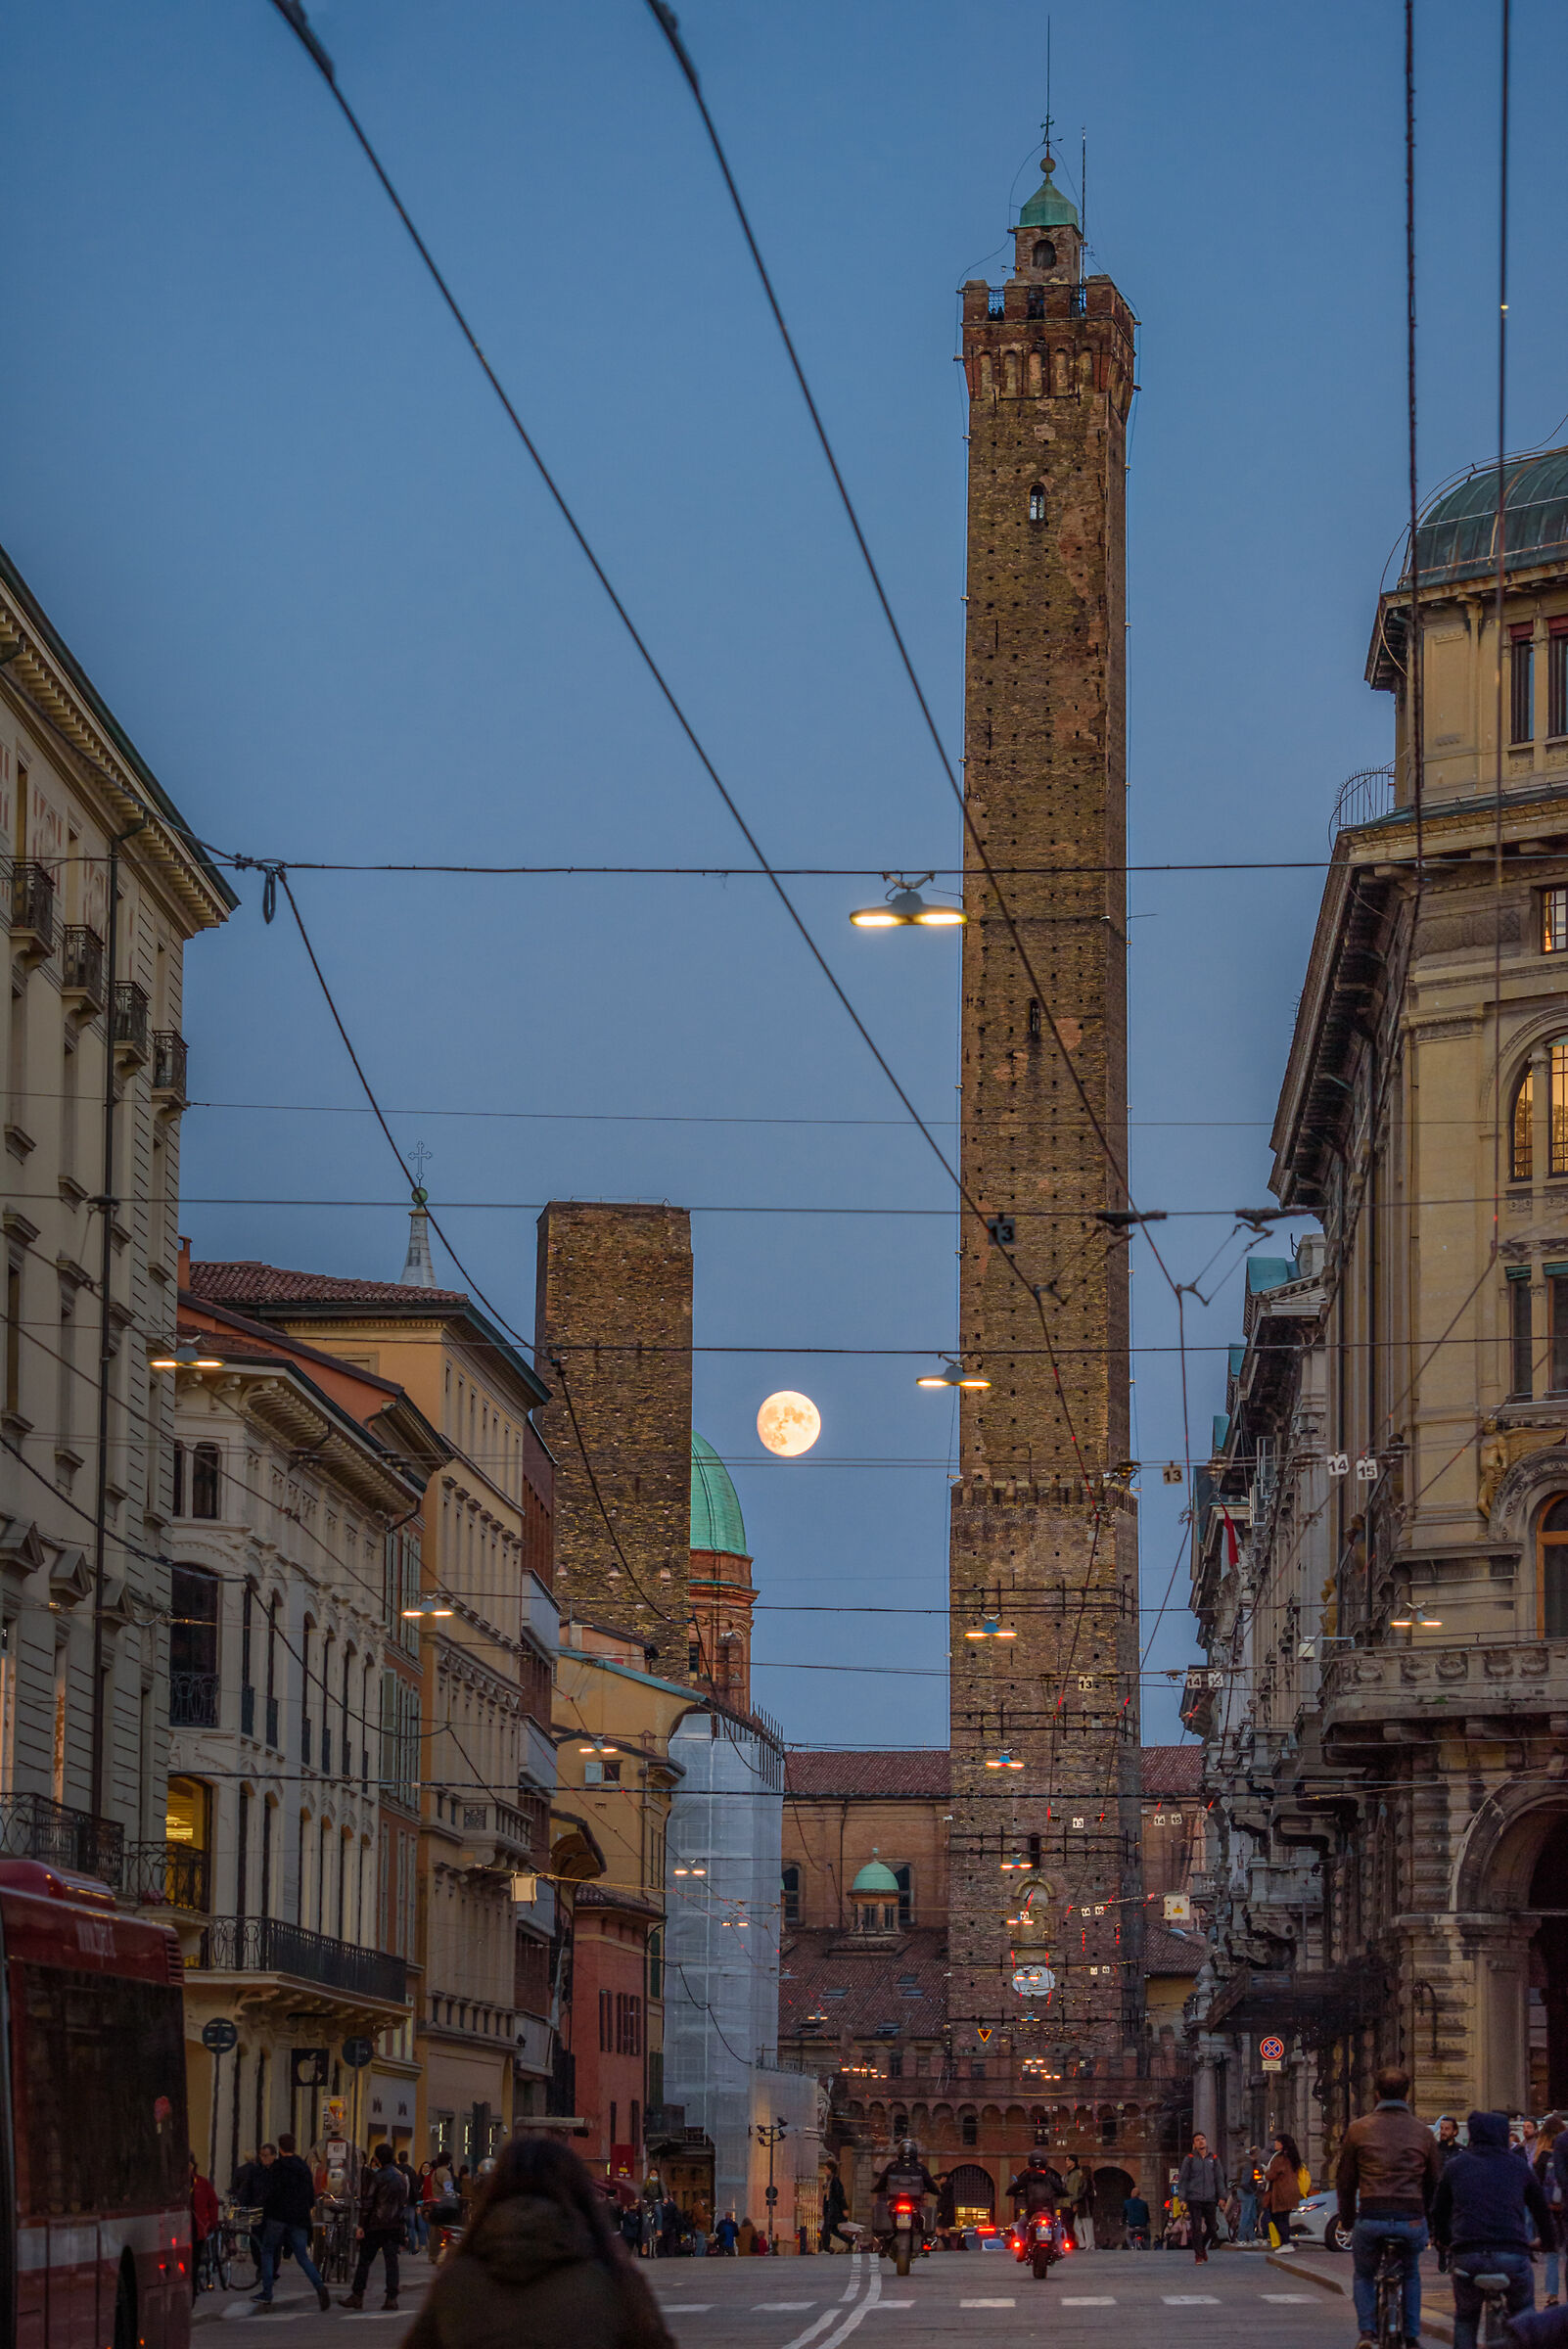 The Moon among the Towers...